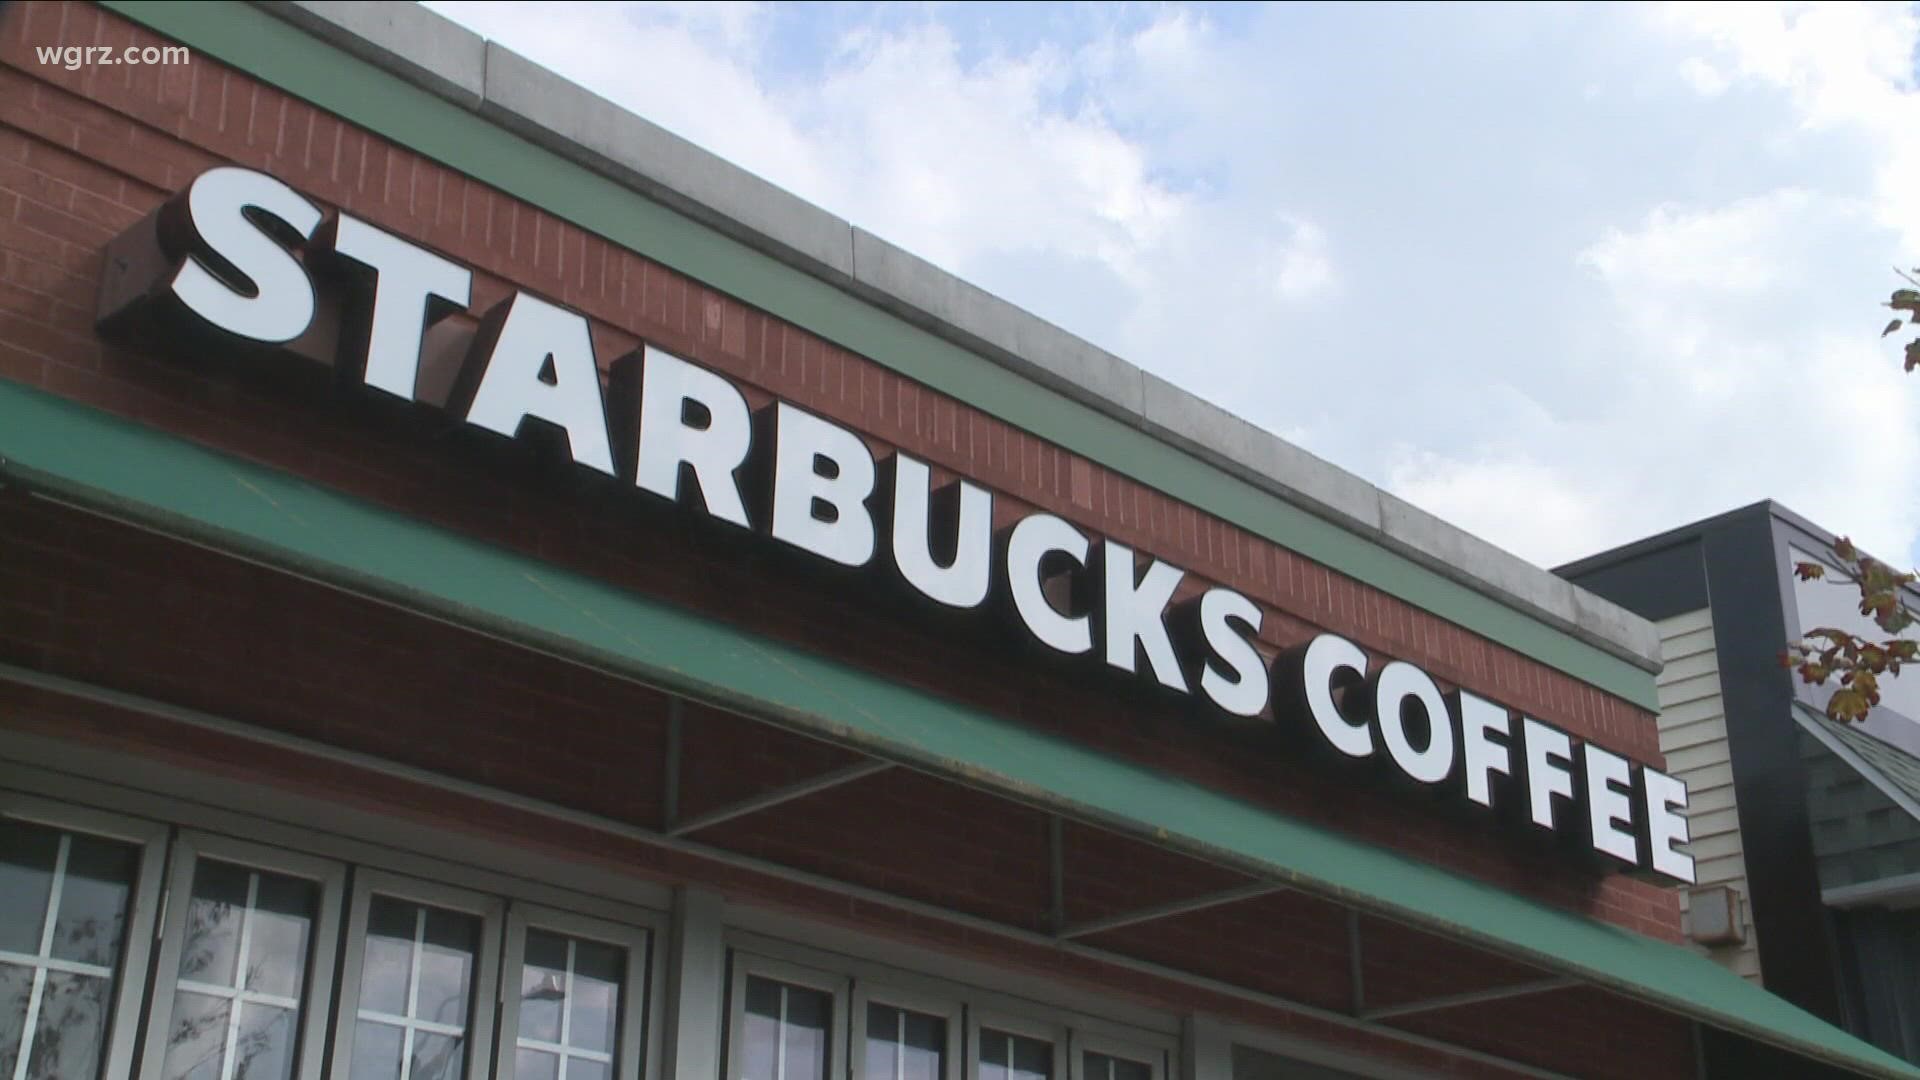 A vote will happen over the next month to see if three Buffalo-area locations will be the first corporate-owned Starbucks stores in the country to unionize.